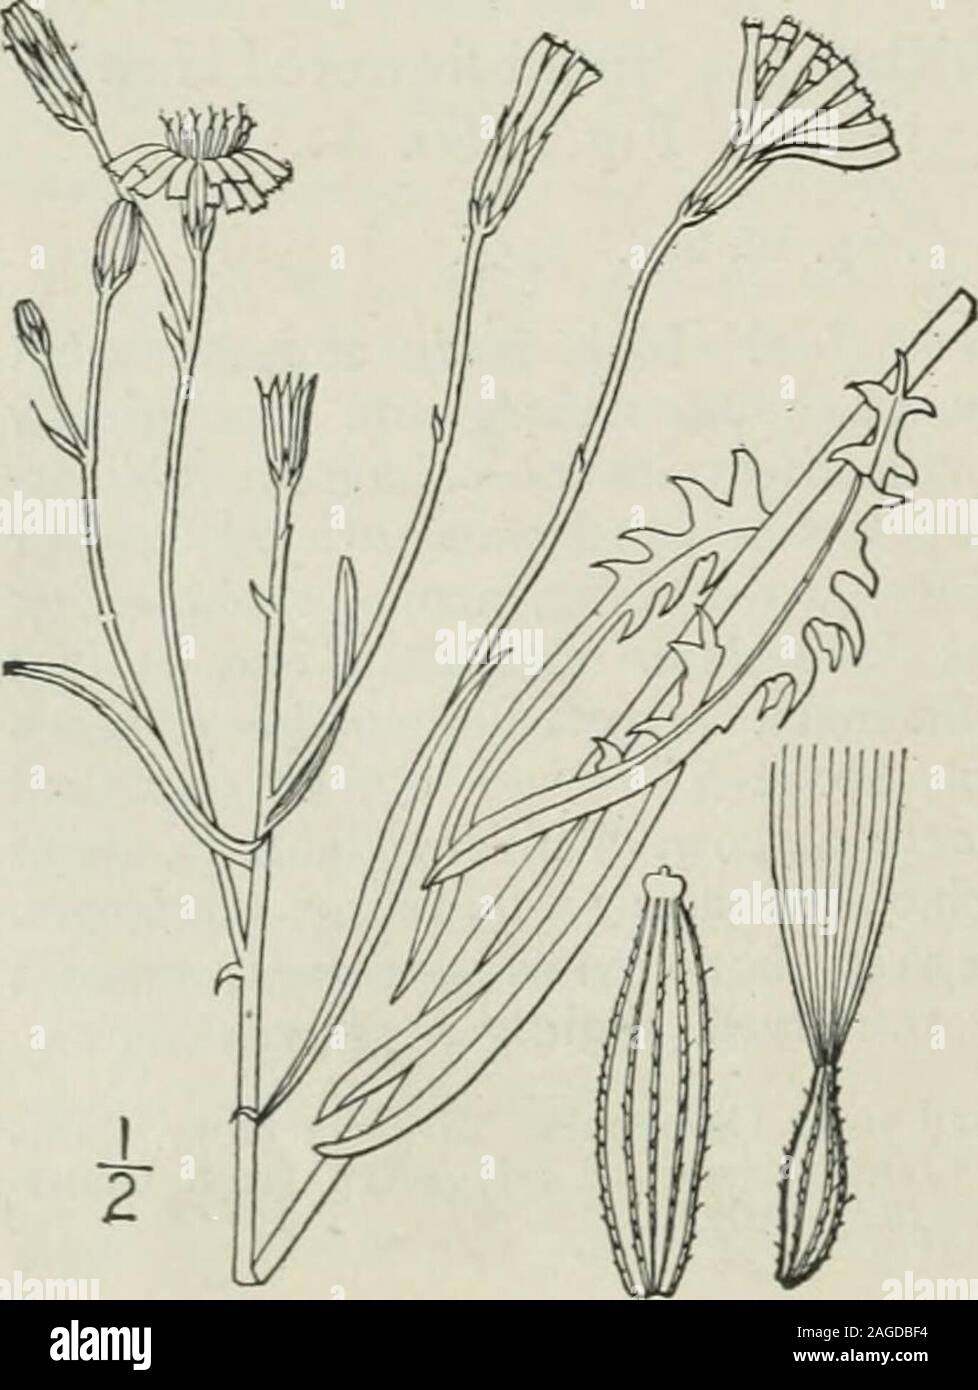 . An illustrated flora of the northern United States, Canada and the British possessions : from Newfoundland to the parallel of the southern boundary of Virginia and from the Atlantic Ocean westward to the 102nd meridian. 4. Crepis tectorum L. Narrow-leaved Hawks-beard. Fig. 4089. Crepis tectorum L. Sp. PI. 807. 1753. Annual; stem slender, puberulent or pubescent,leafy, branched, i°-2° high. Basal leaves lanceolate,dentate, or runcinate-pinnatifid, 4-6 long; stemleaves sessile, sometimes slightly sagittate at thebase, linear, entire, dentate, or lobed, their marginsrevolute; heads numerous, co Stock Photo